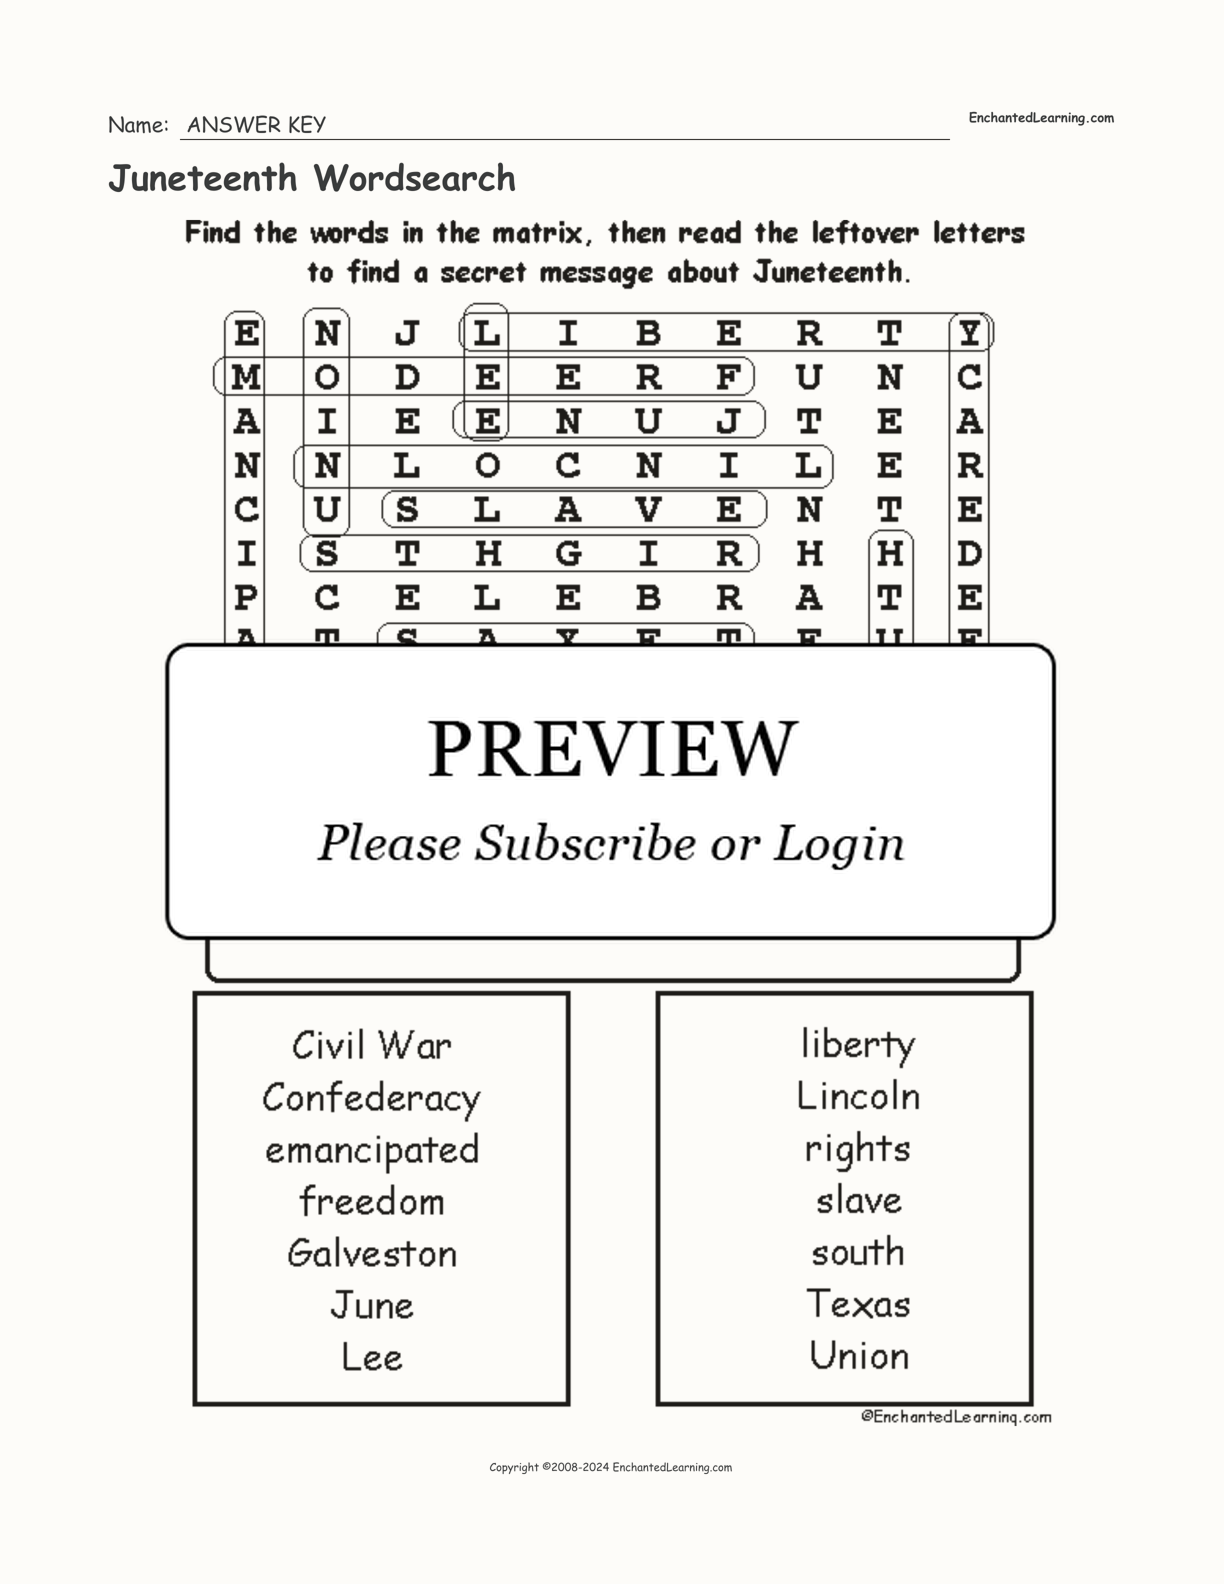 Juneteenth Wordsearch interactive worksheet page 2